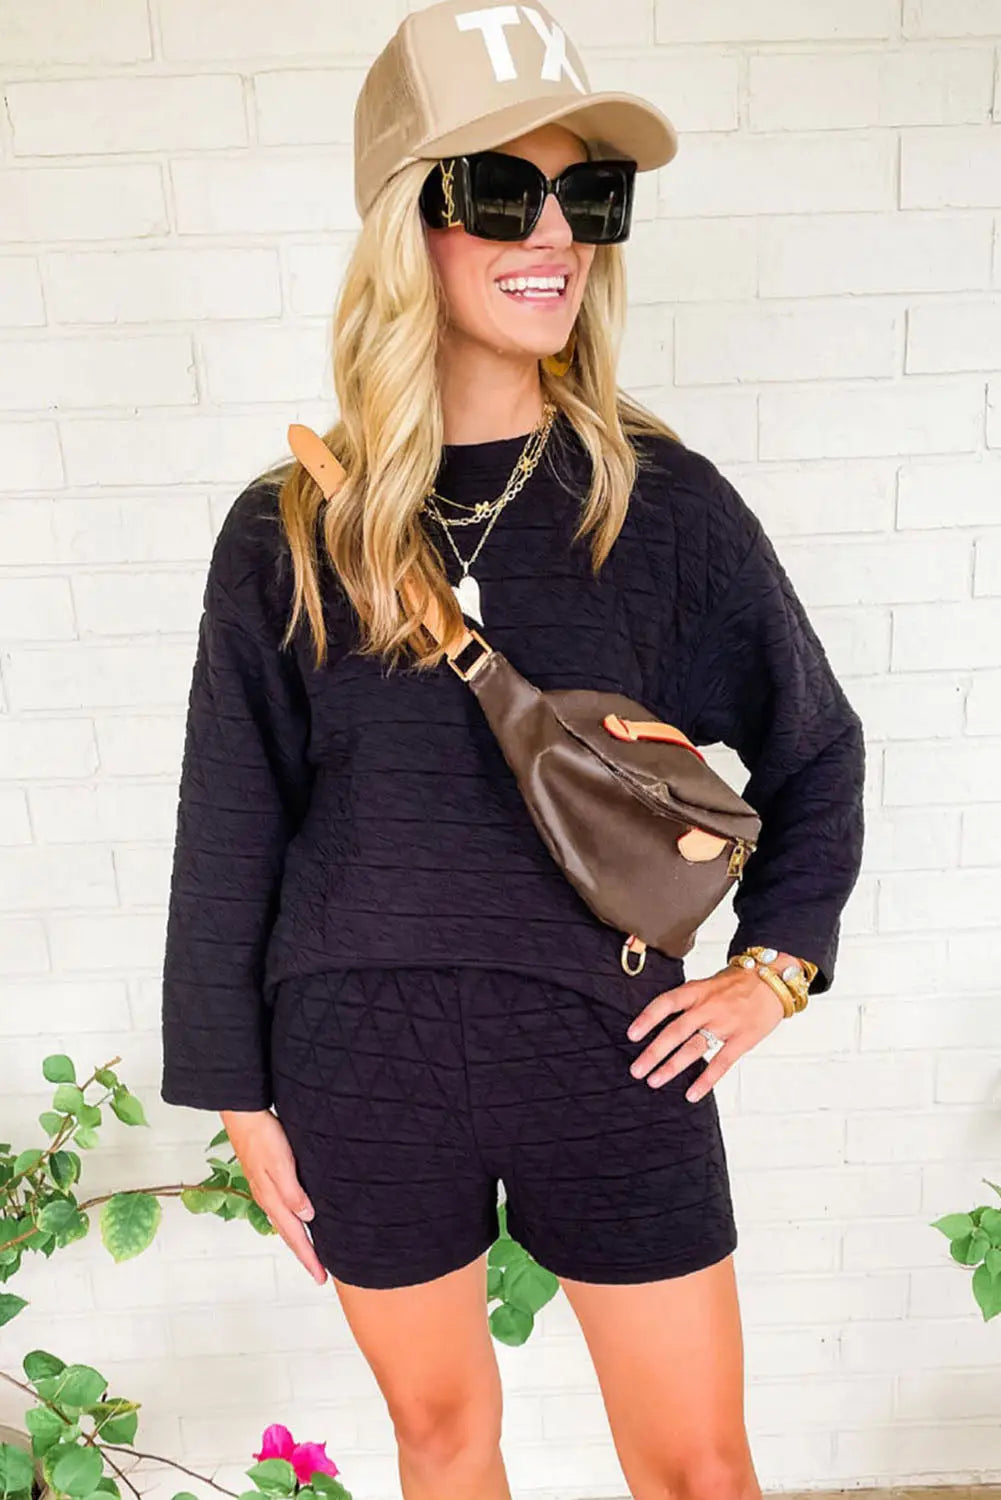 Black textured long sleeve top shorts outfit - loungewear